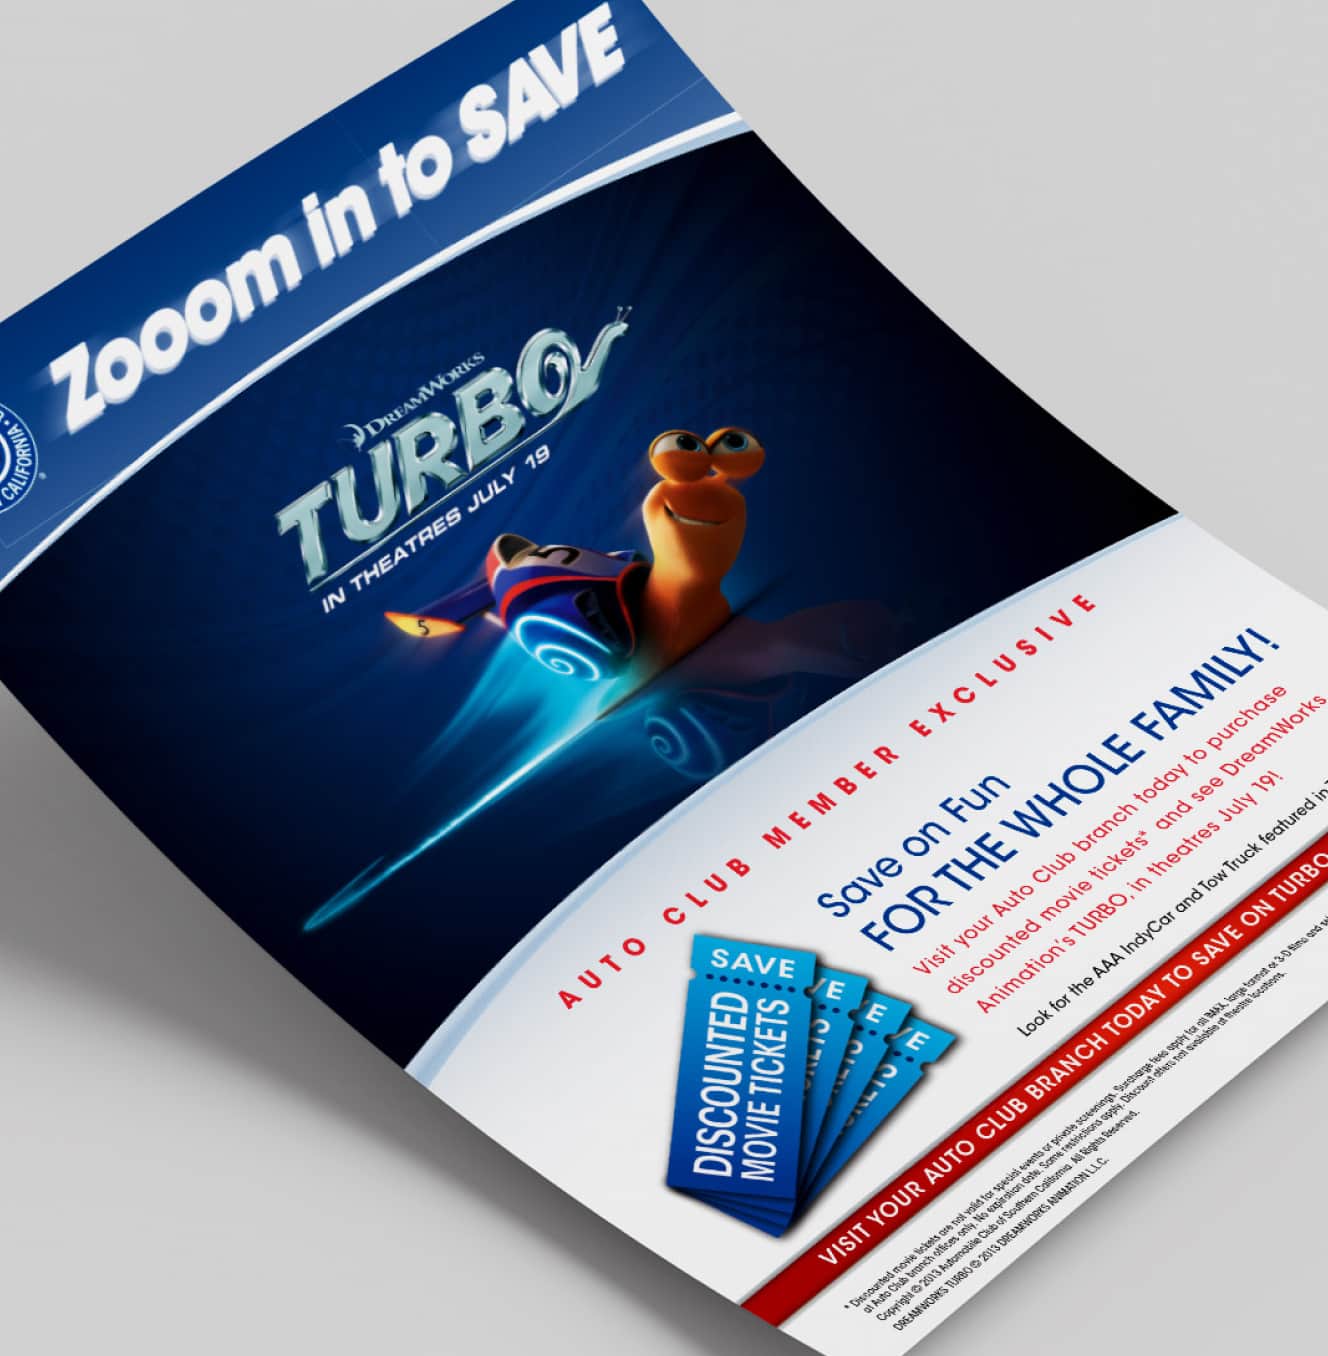 A flyer tilted to the side, advertising a savings deal for an event called 'TURBO' with a graphic of an animated snail and tagline 'Zoom into SAVE'.